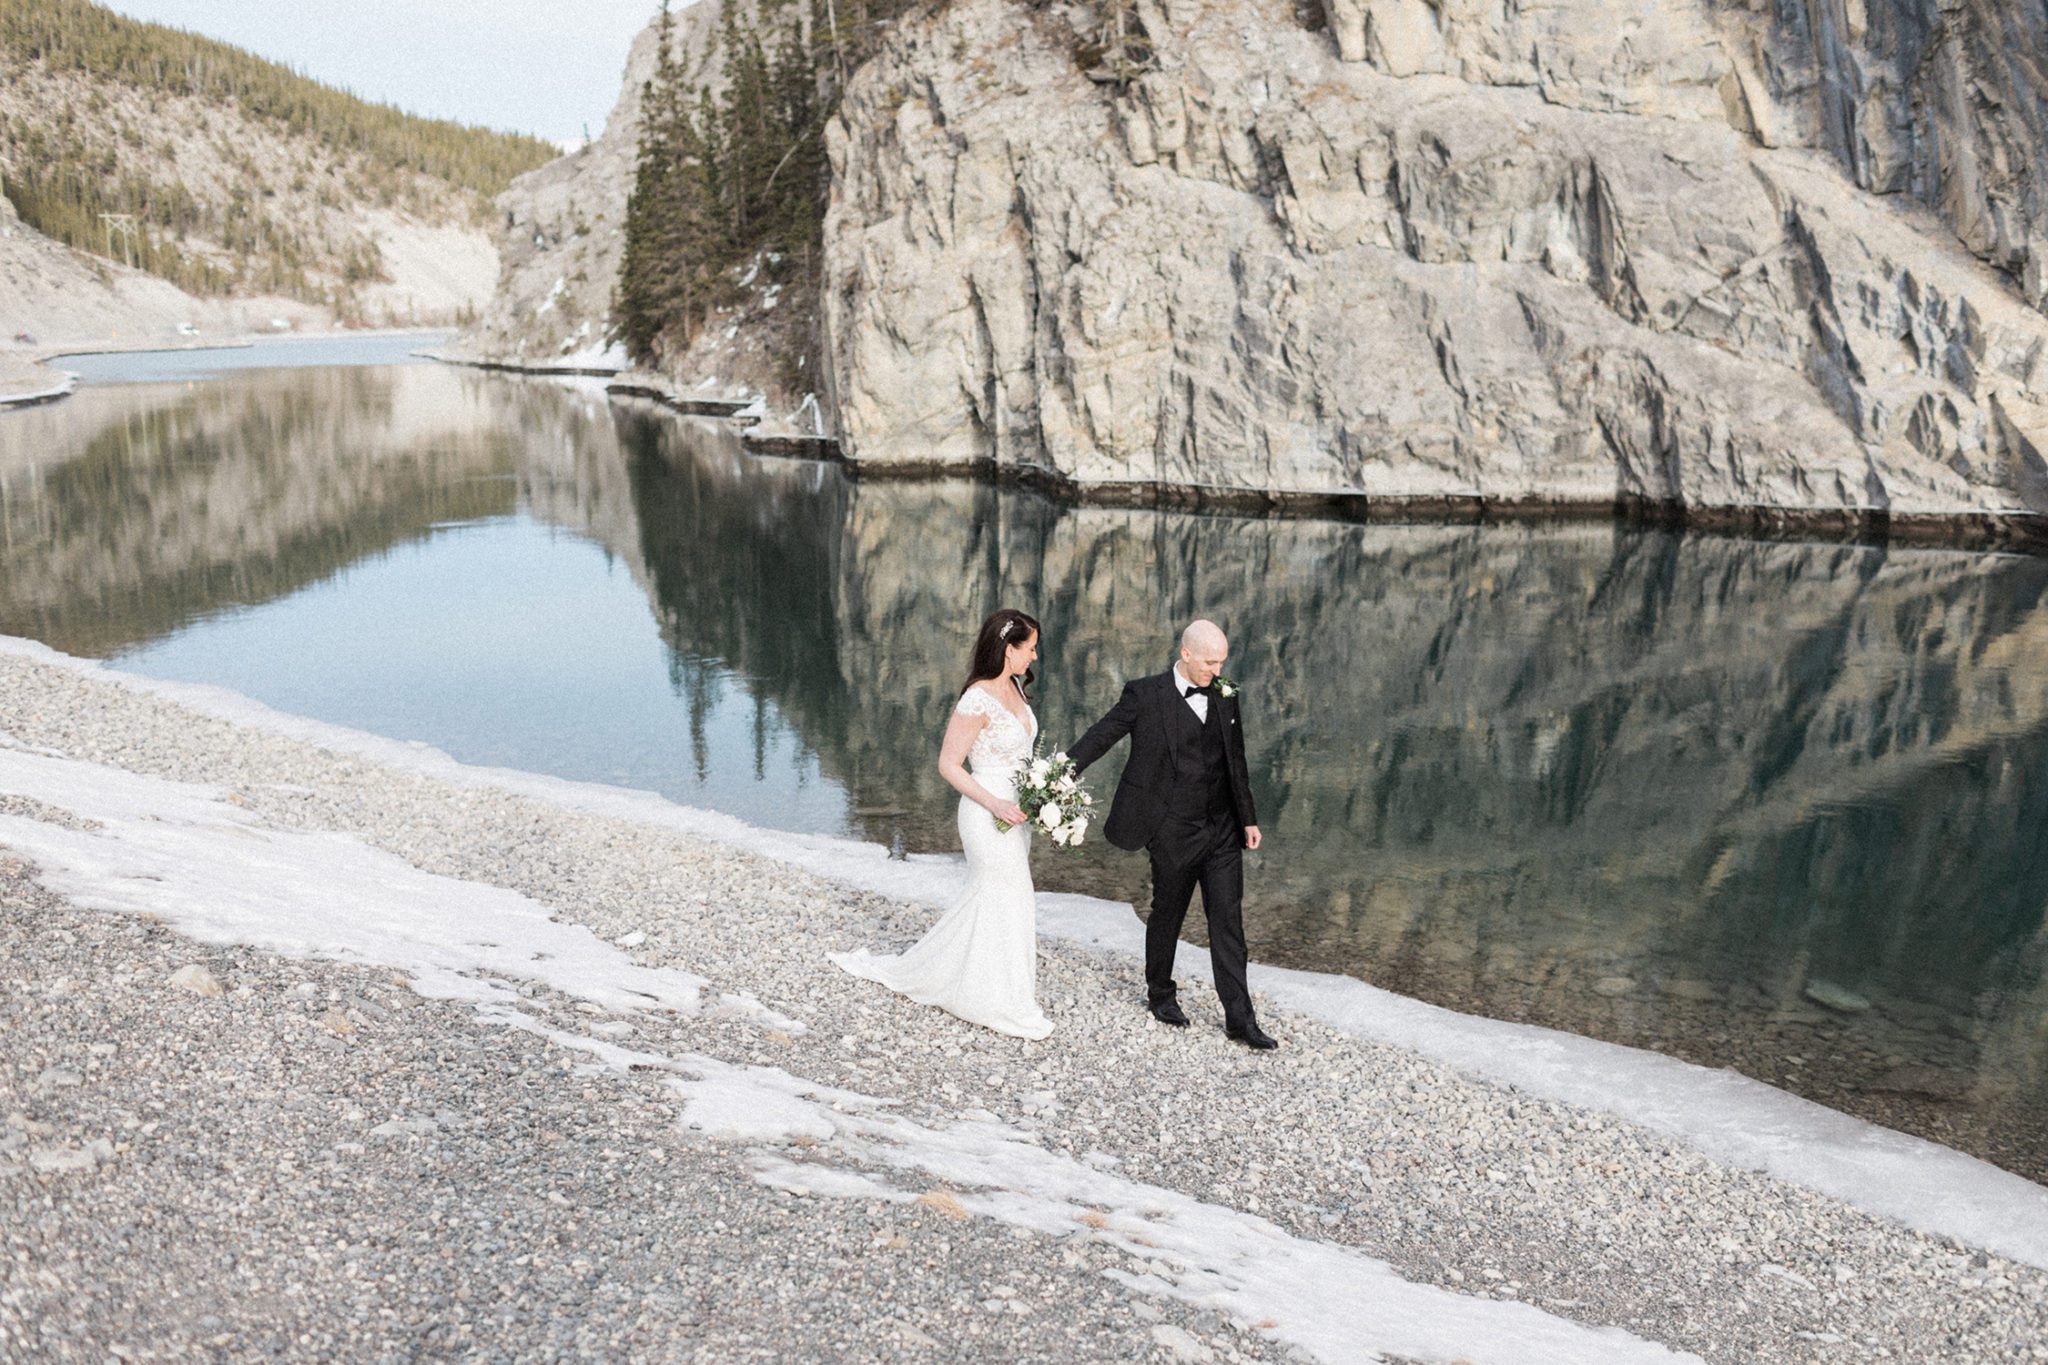 Lakeside portraits in the Canadian Rocky Mountains